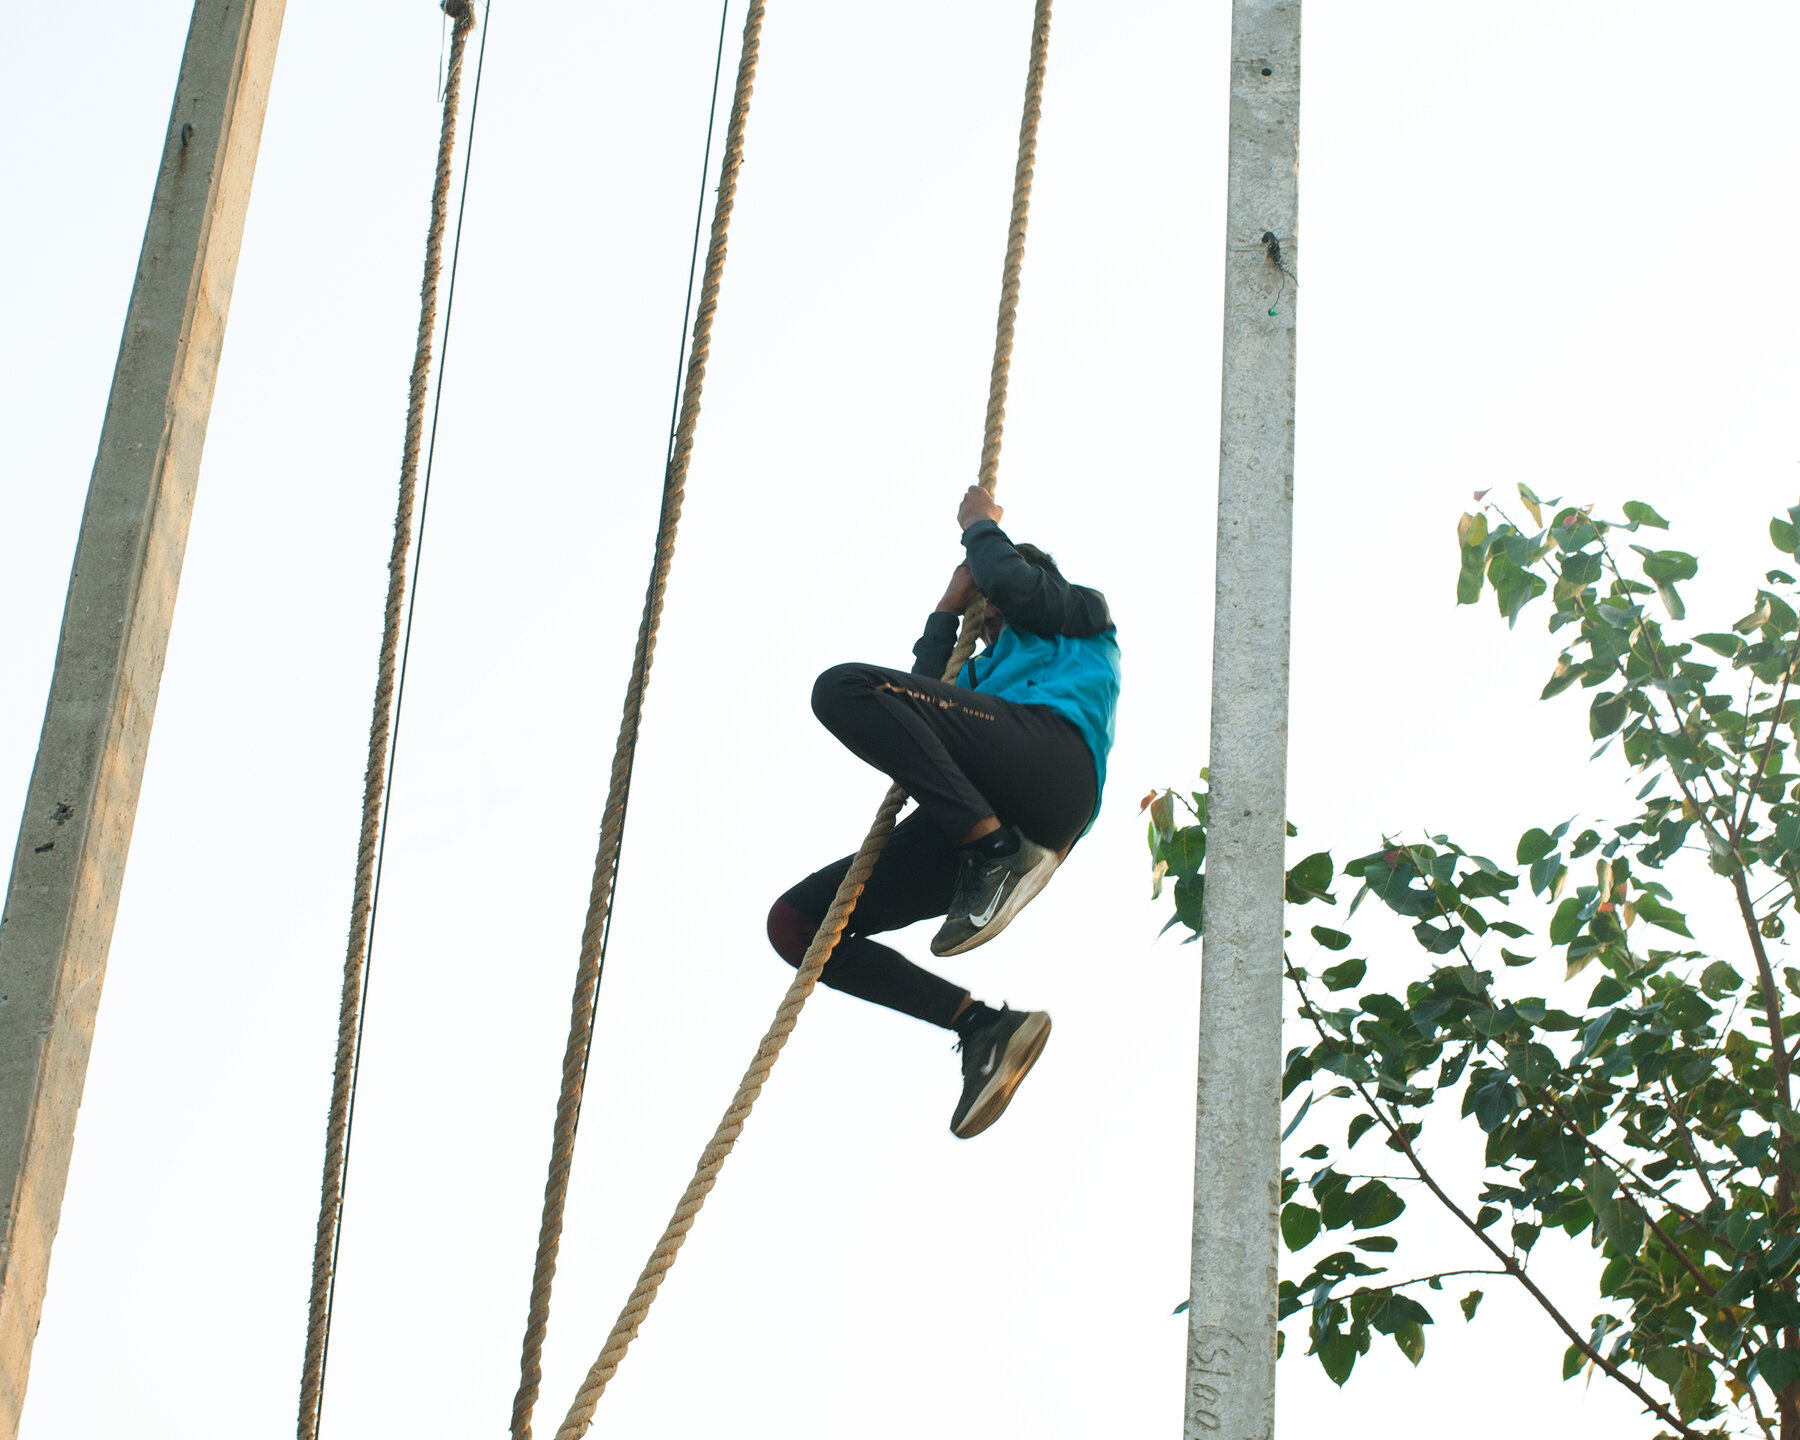 A young woman wearing a blue sweatshirt, black pants and sneakers, holding onto a rope suspended in the air. She is level with the top of a tree, which is to her right. To her left are more ropes and a wood post.